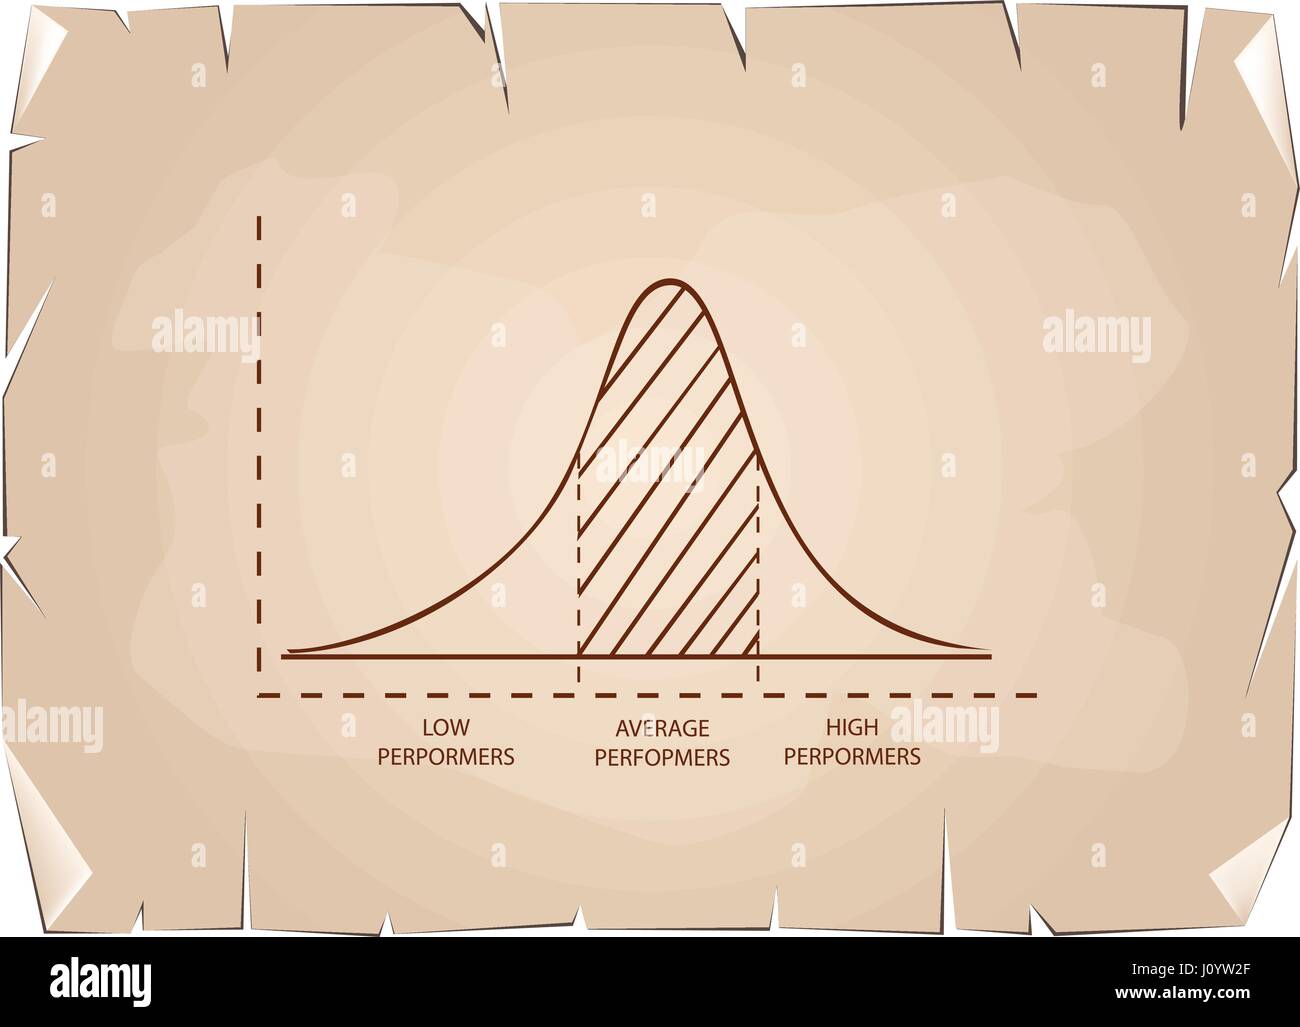 Business and Marketing Concepts, Illustration of Standard Deviation, Gaussian Bell or Normal Distribution Curve on Old Antique Vintage Grunge Paper Te Stock Vector